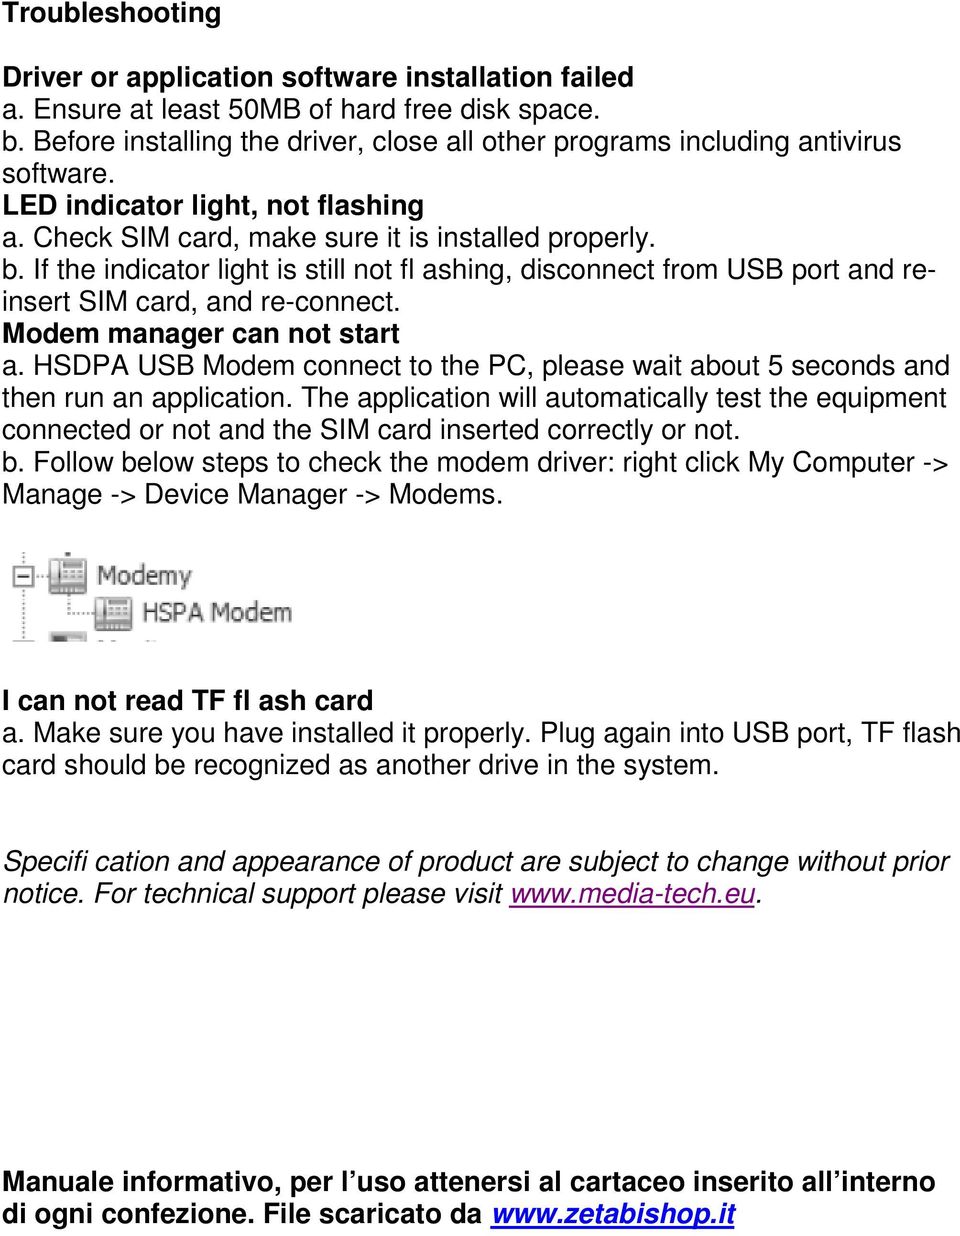 If the indicator light is still not fl ashing, disconnect from USB port and reinsert SIM card, and re-connect. Modem manager can not start a.